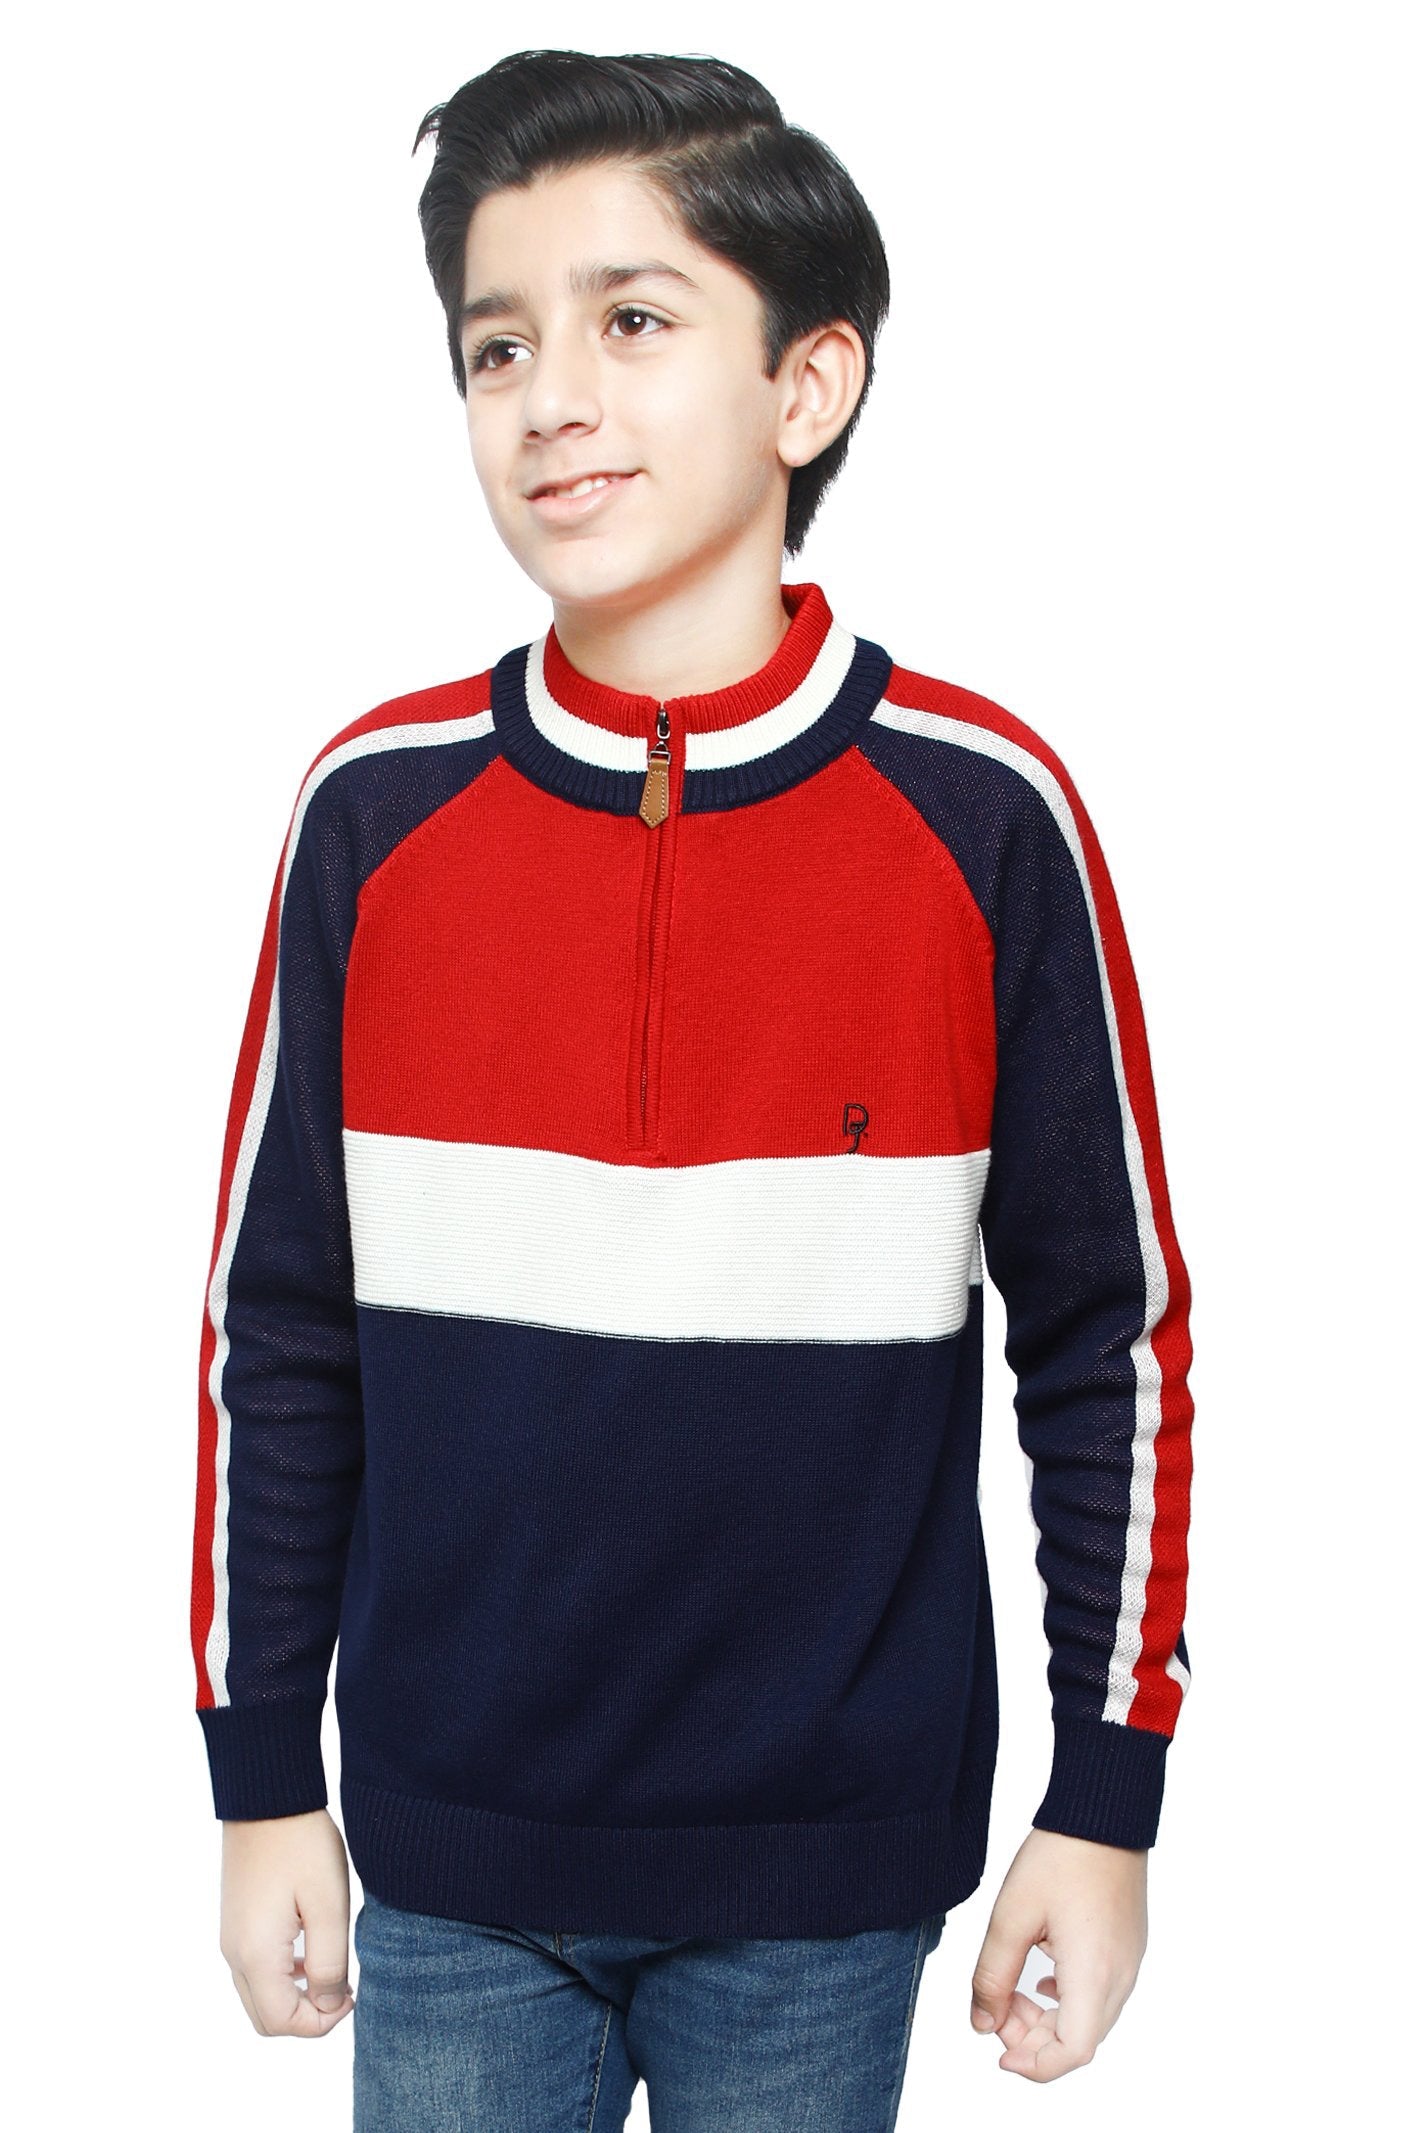 Boys Sweaters In Red SKU: KBE-0172-RED - Diners